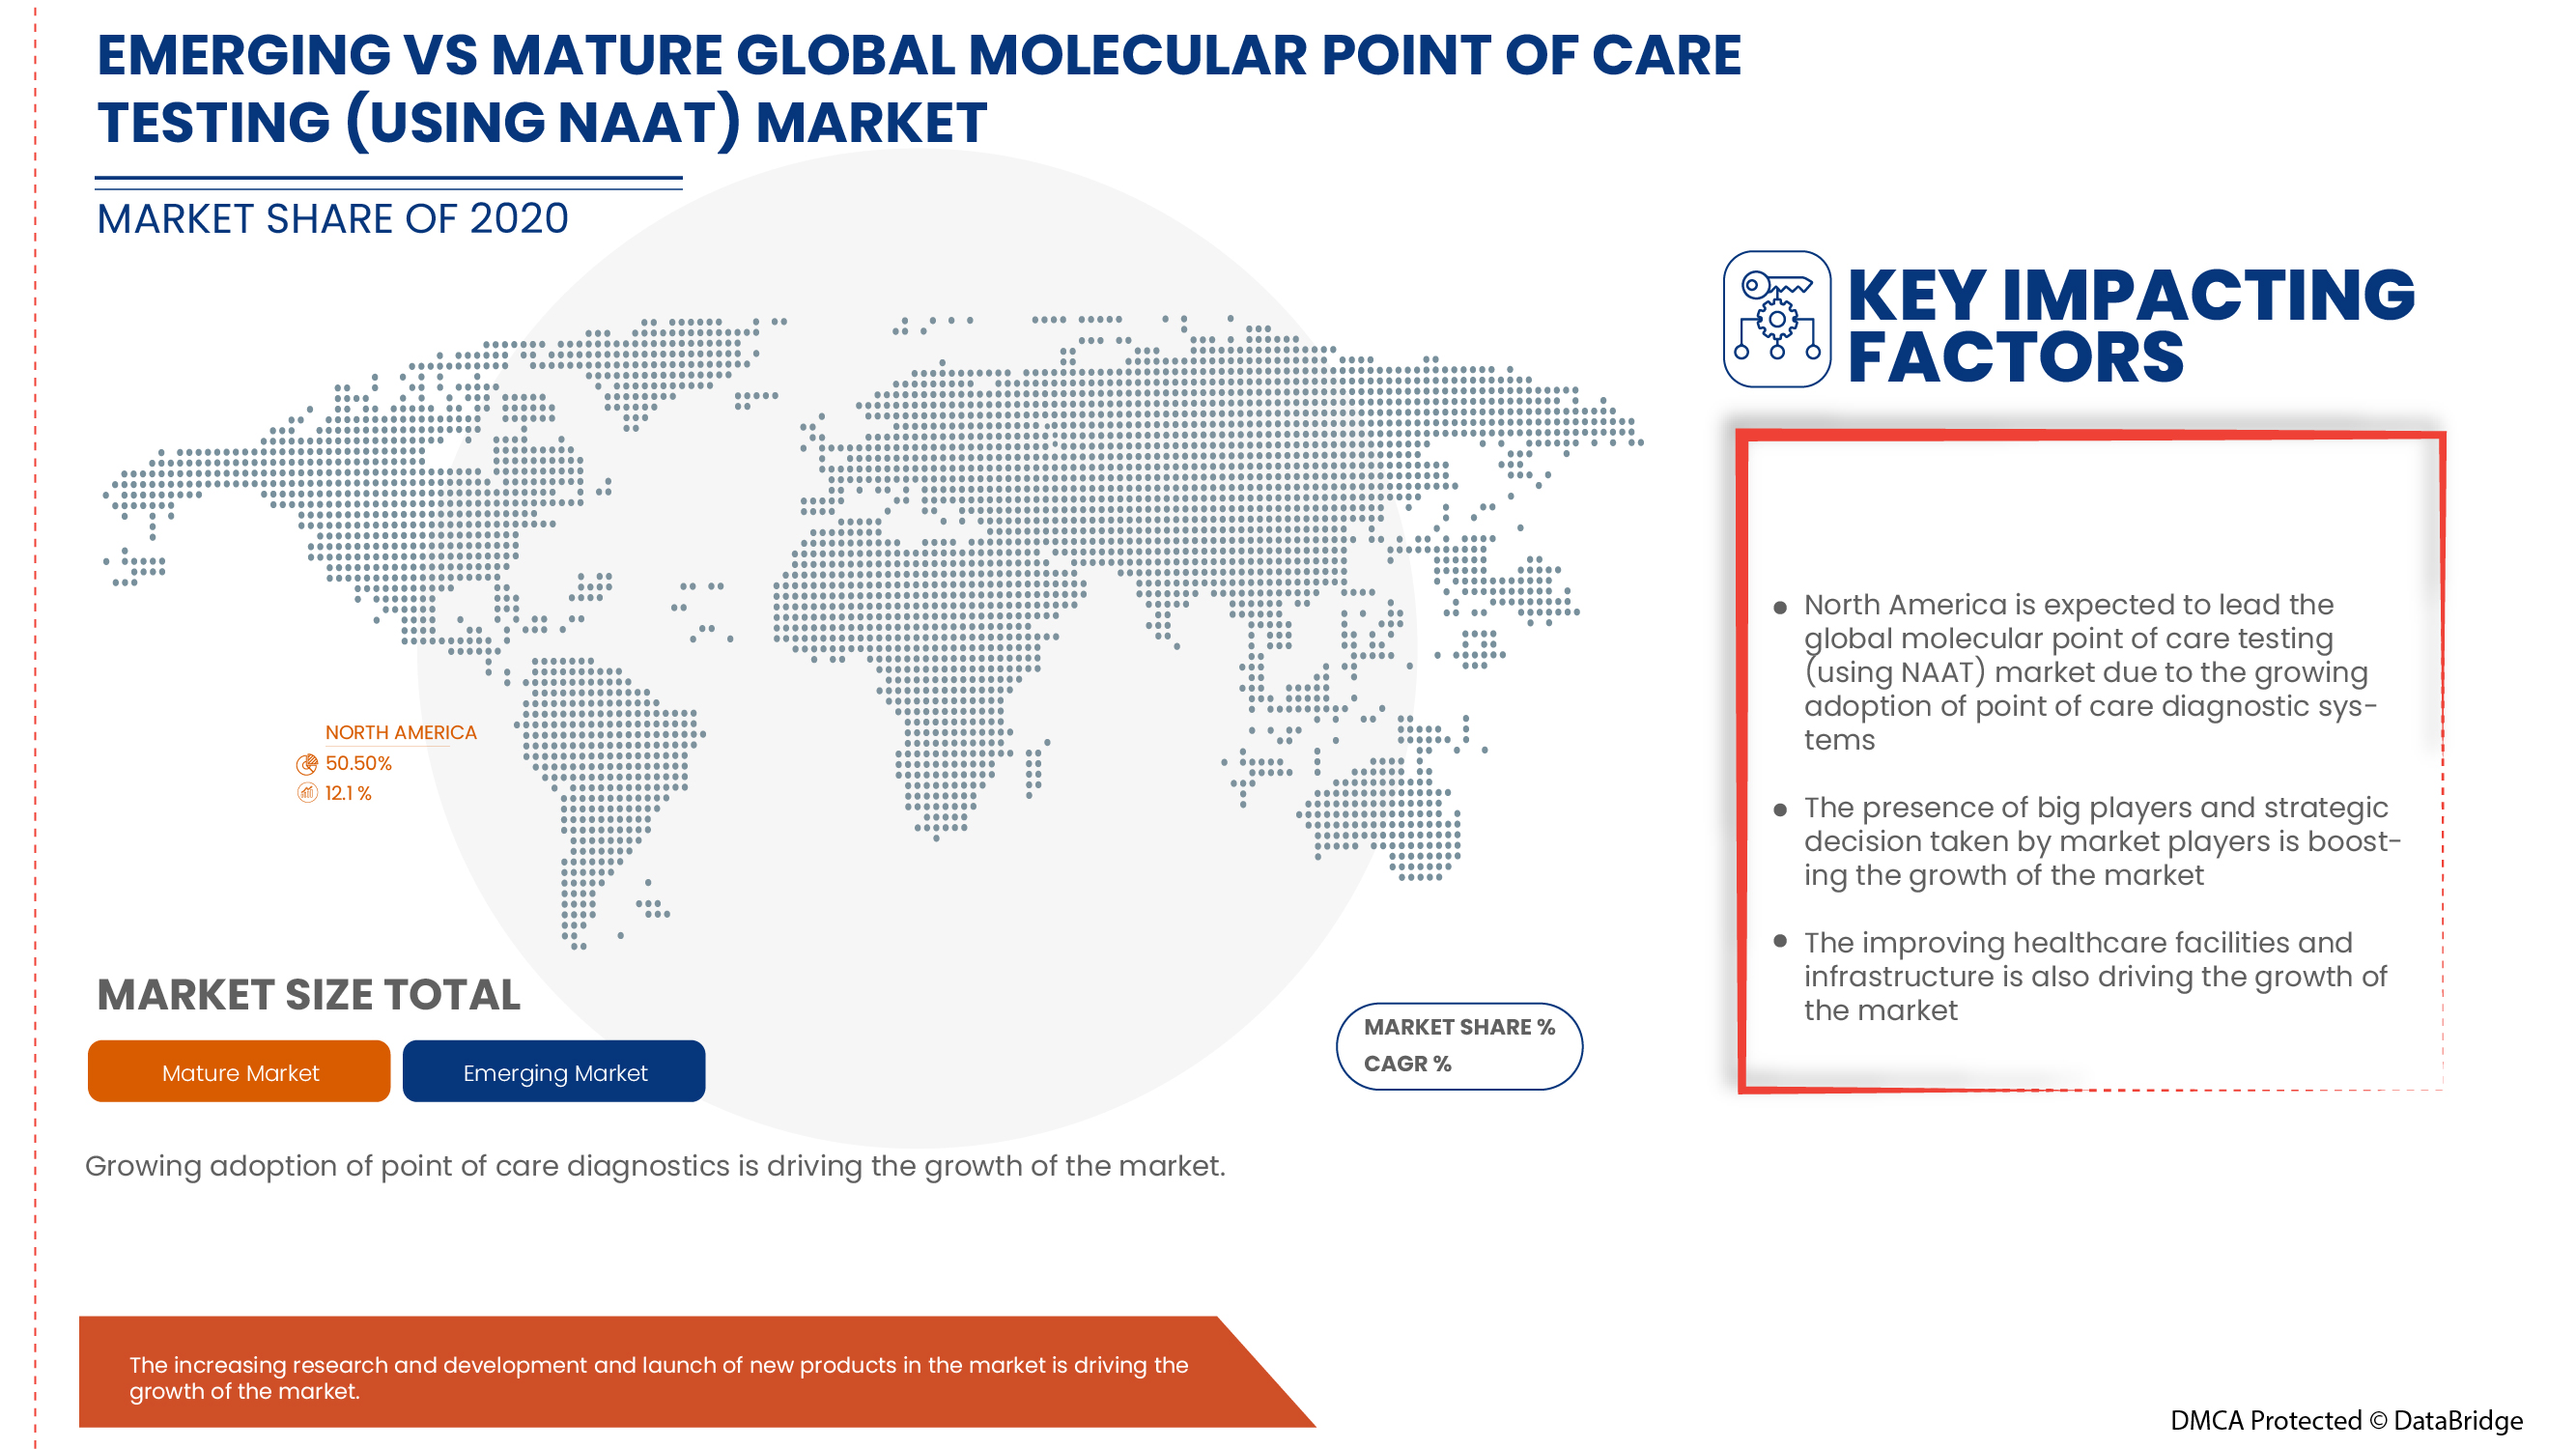 Molecular Point of Care Testing (using NAAT) Market